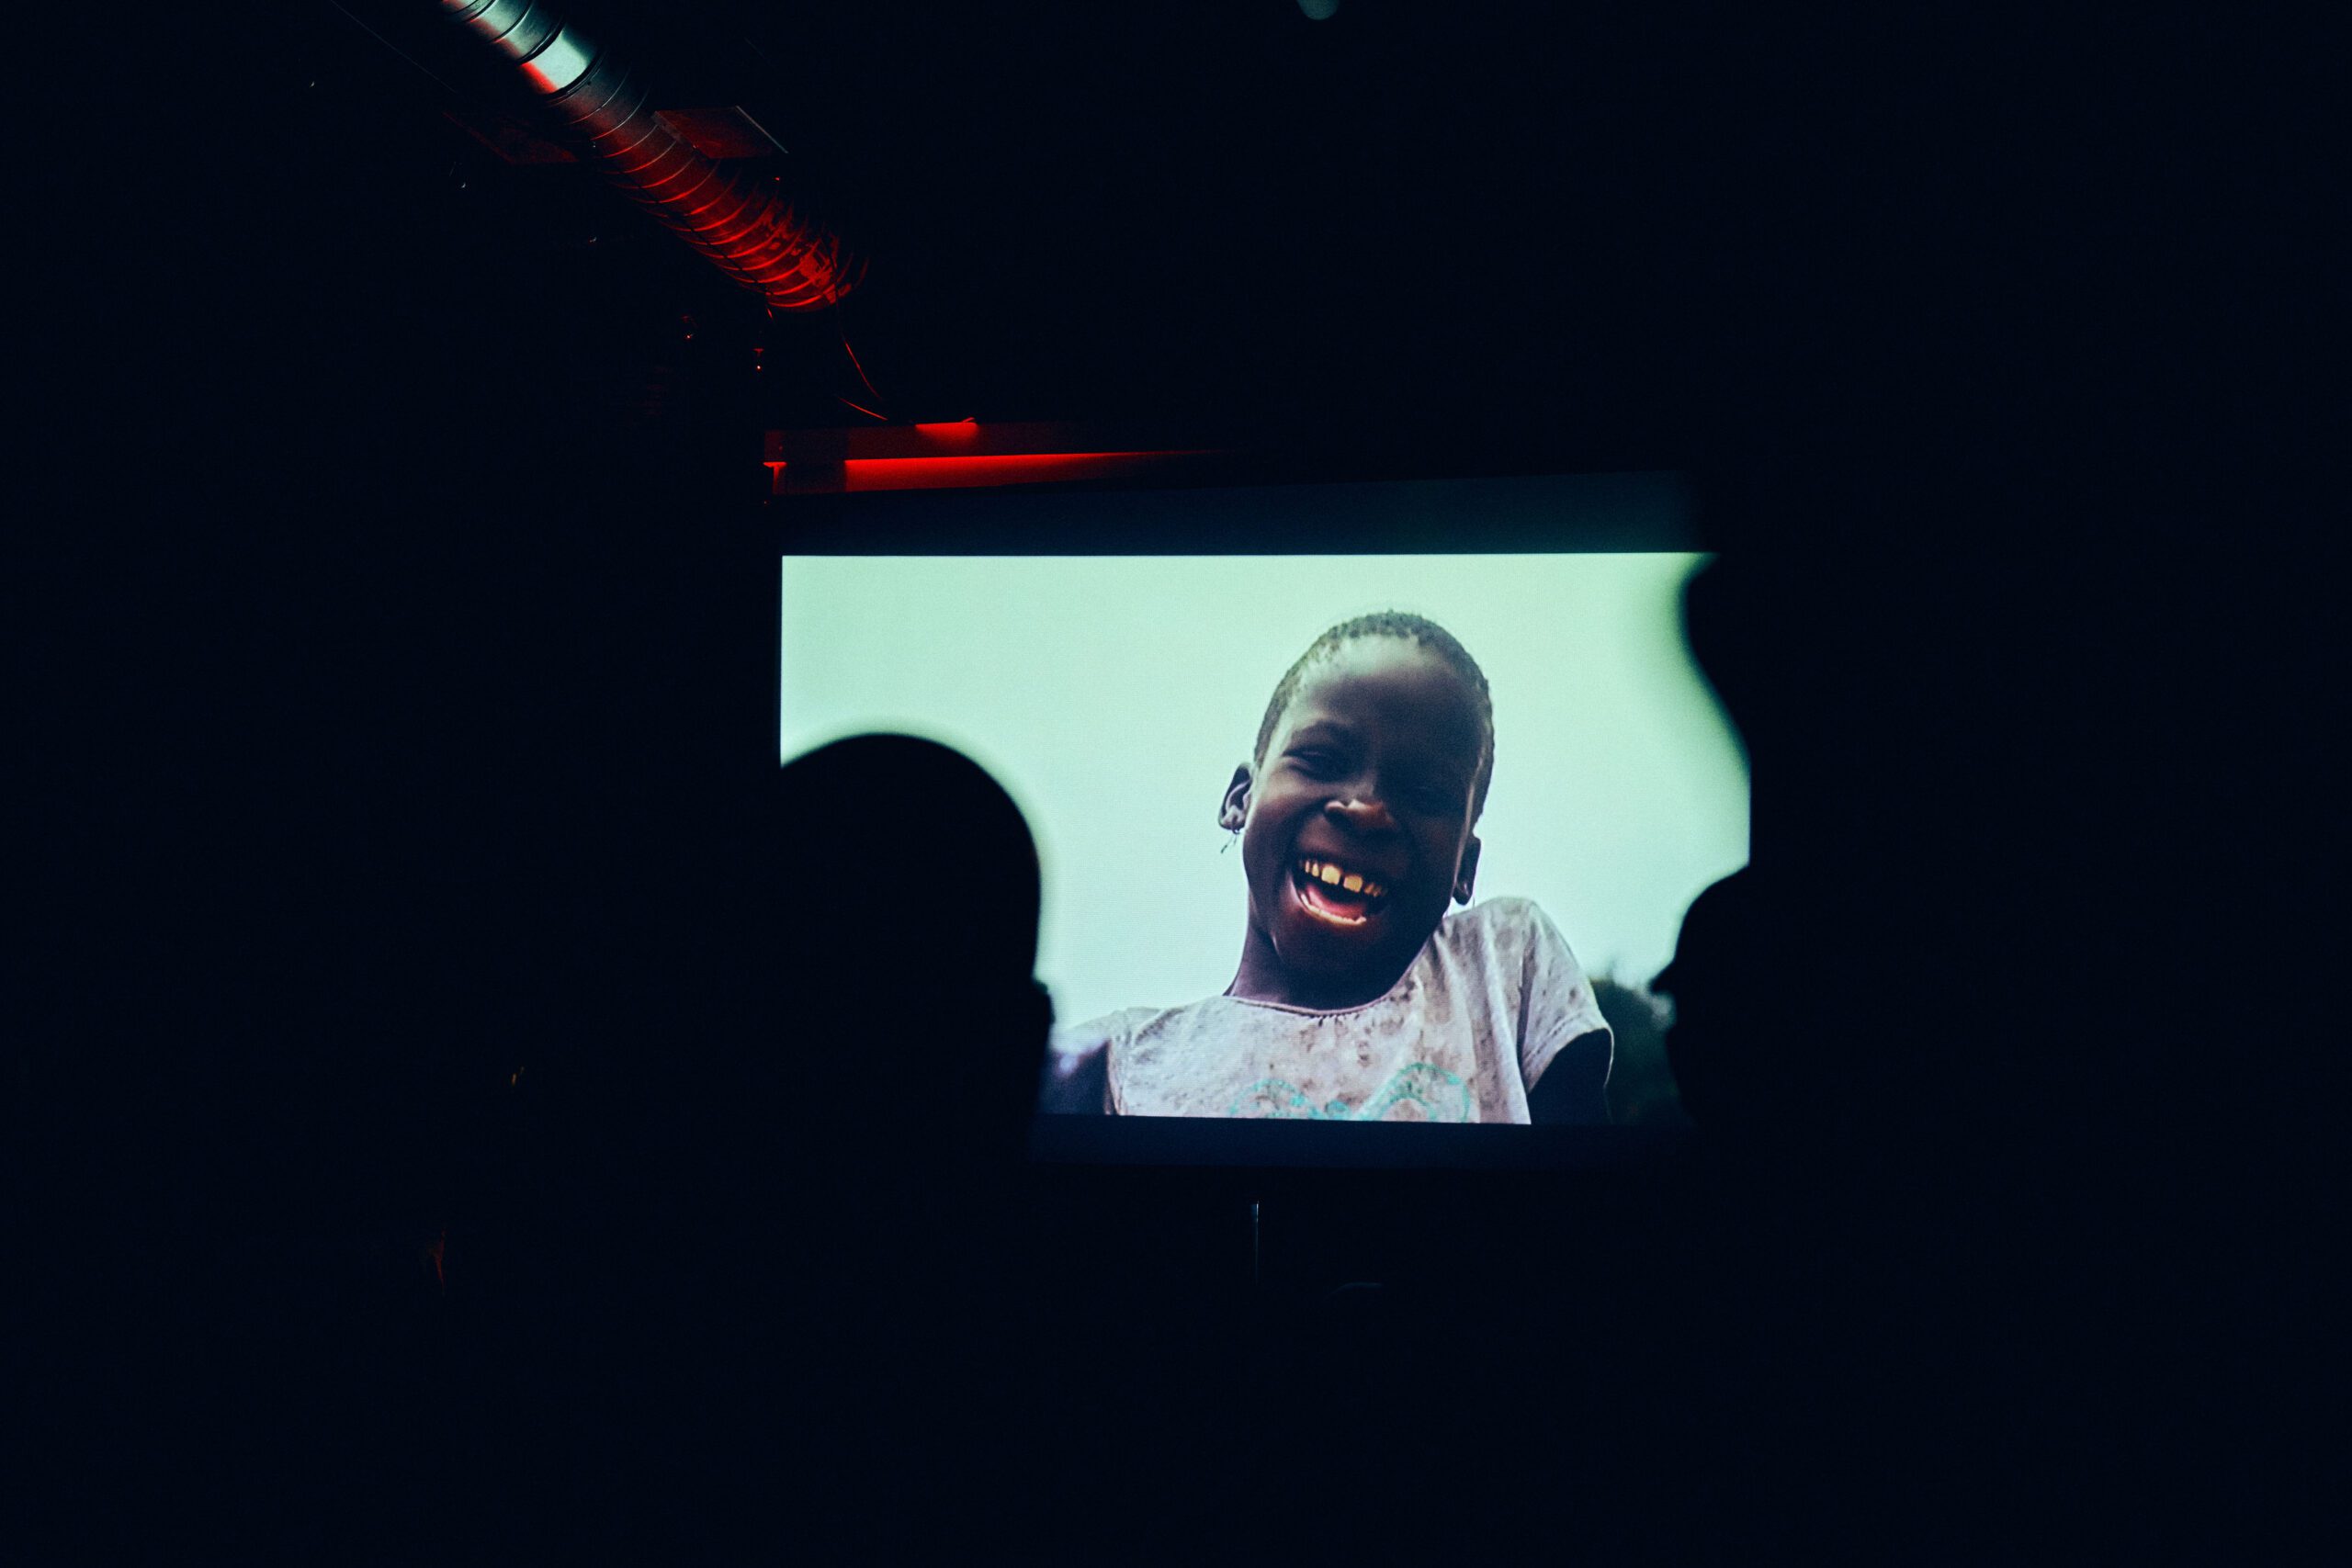 A child's face is shown on a screen in a dark room.